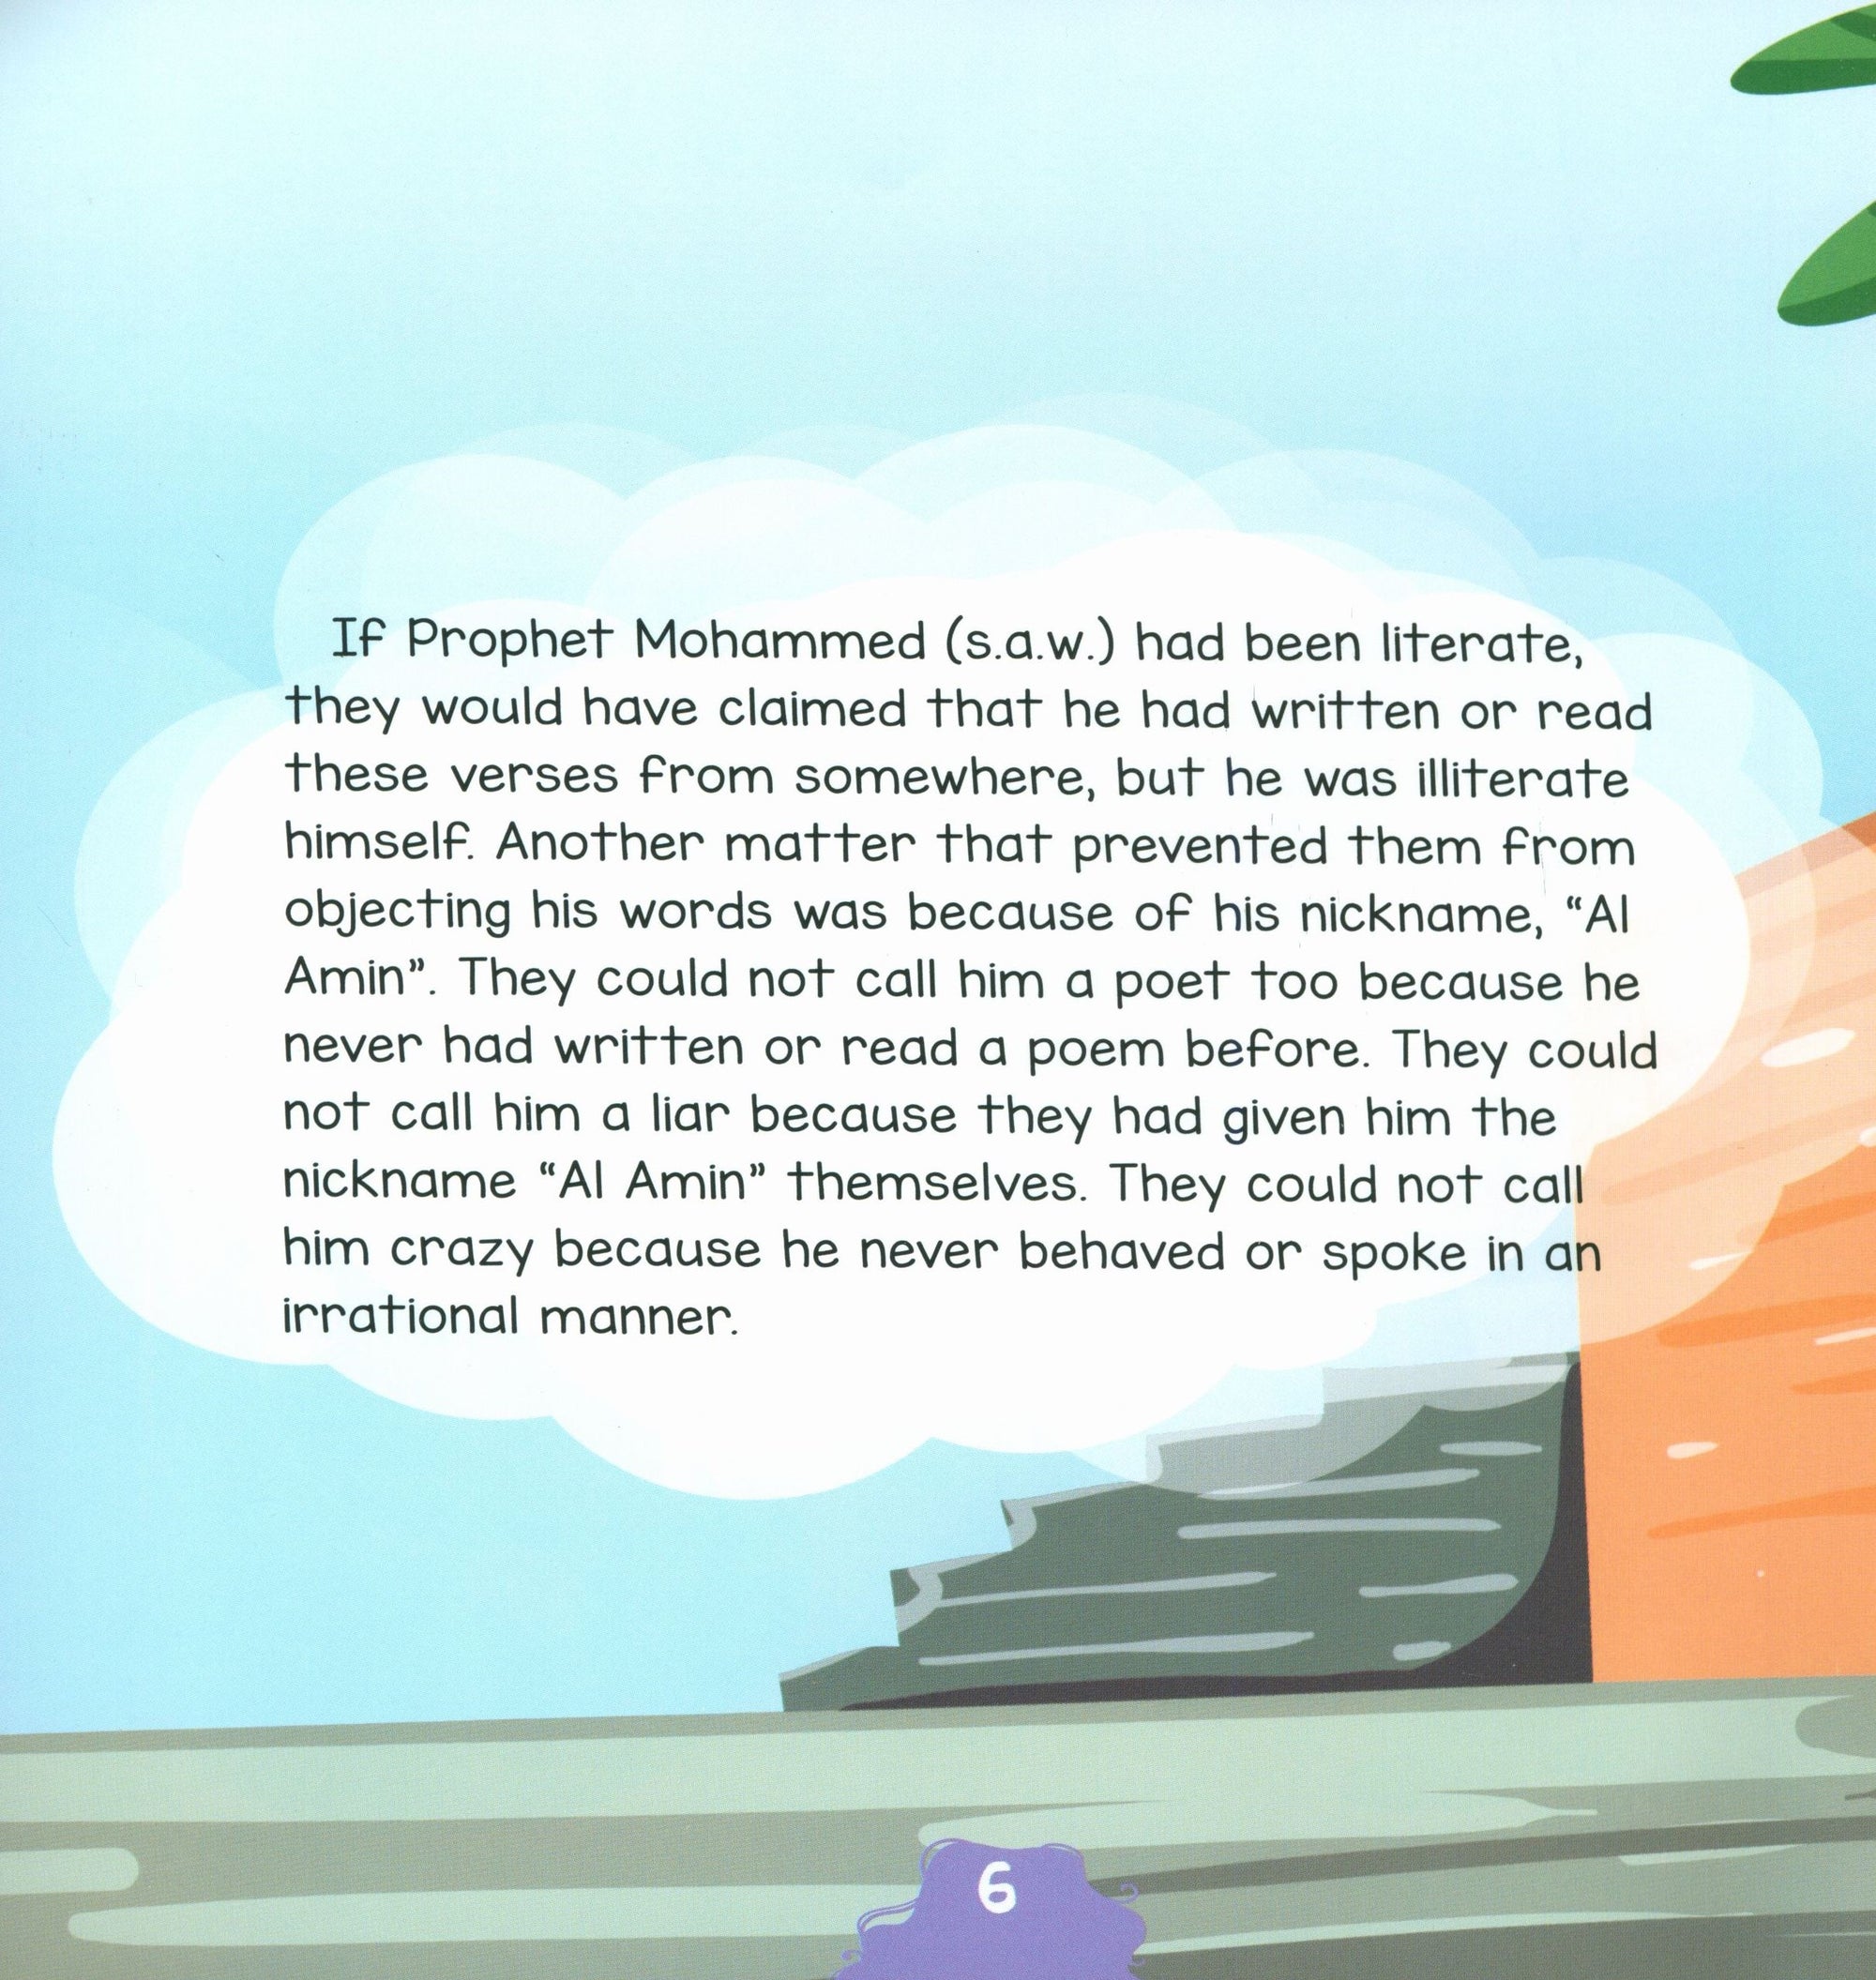 The Messengers of Allah - Prophet Mohammad (S.A.W)